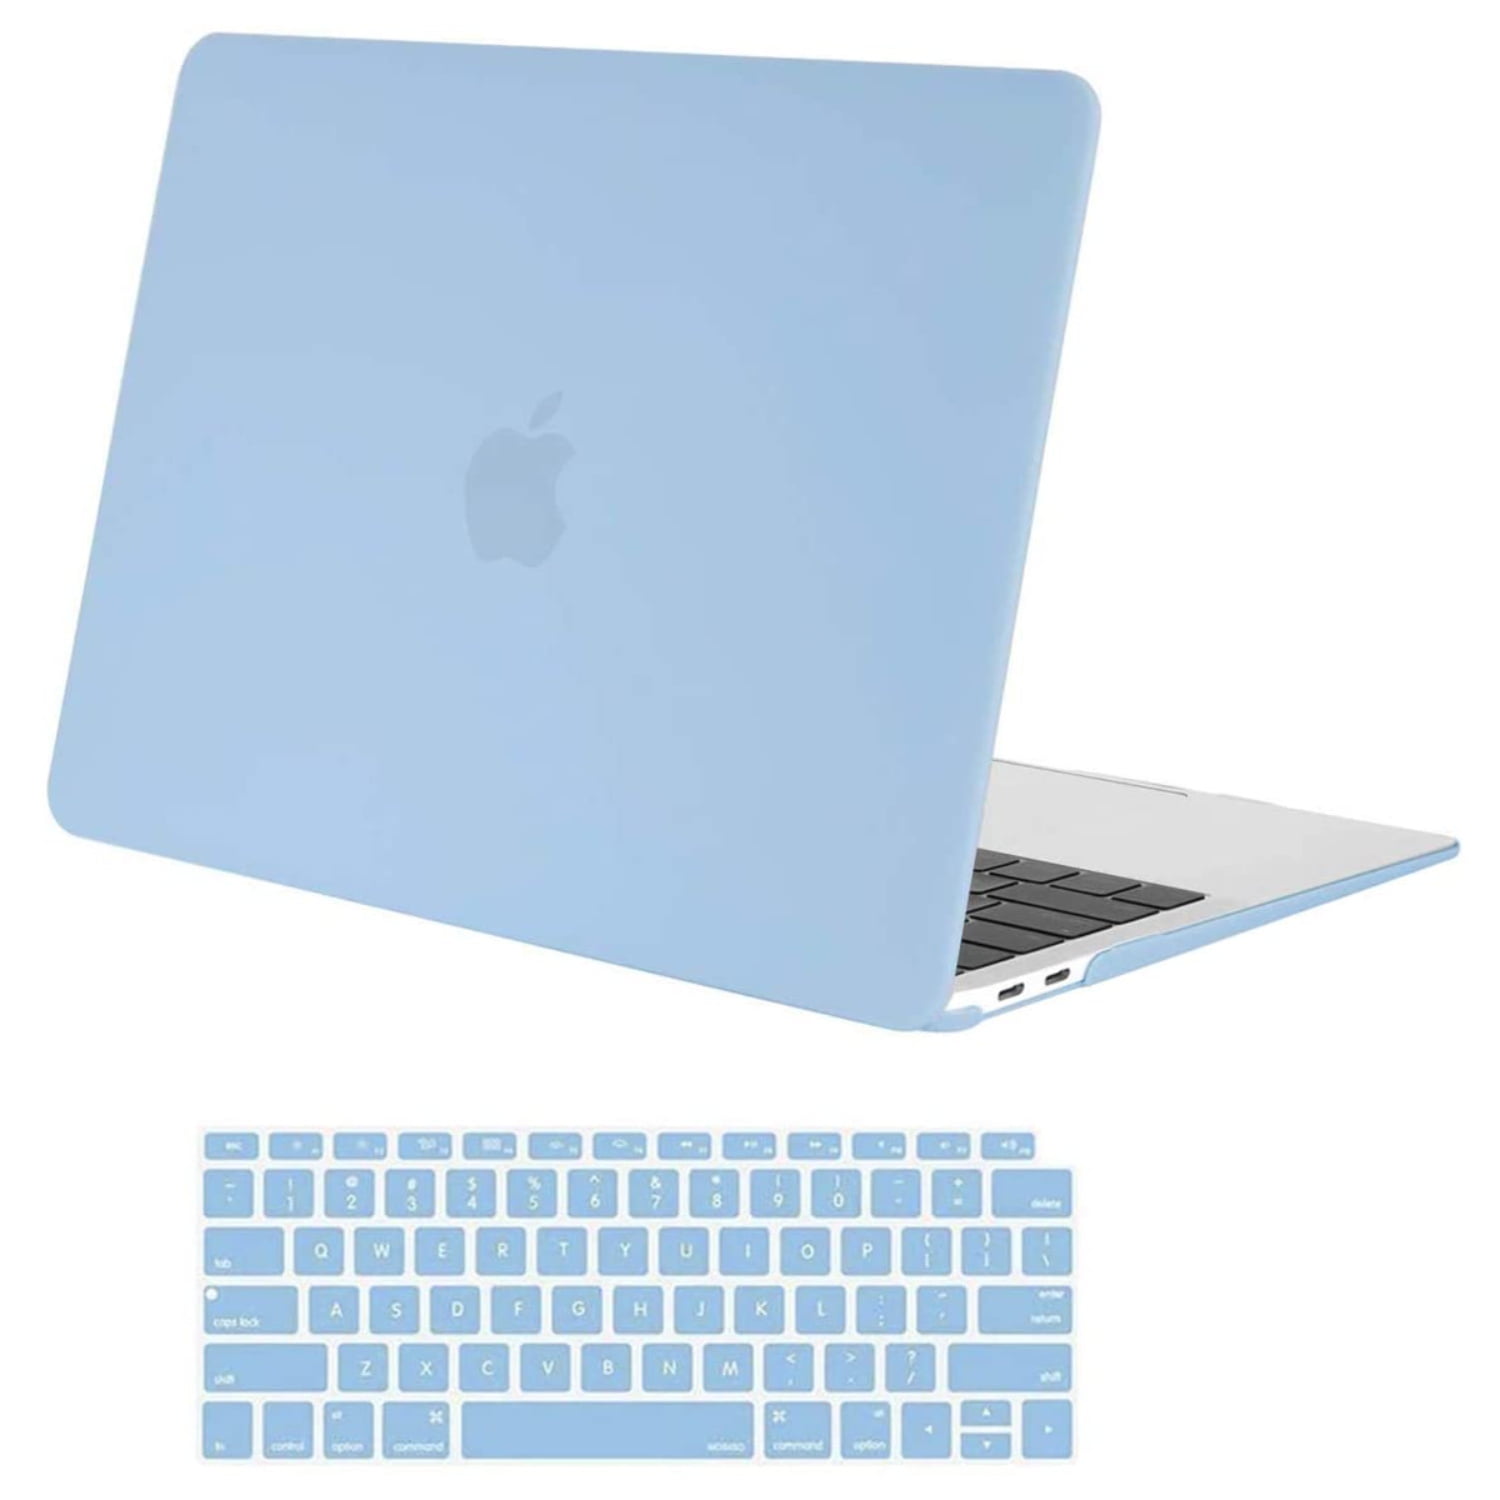 Newest MacBook Air 13 Inch 2018 Release A1932 Retina Display & Touch ID Keyboard 